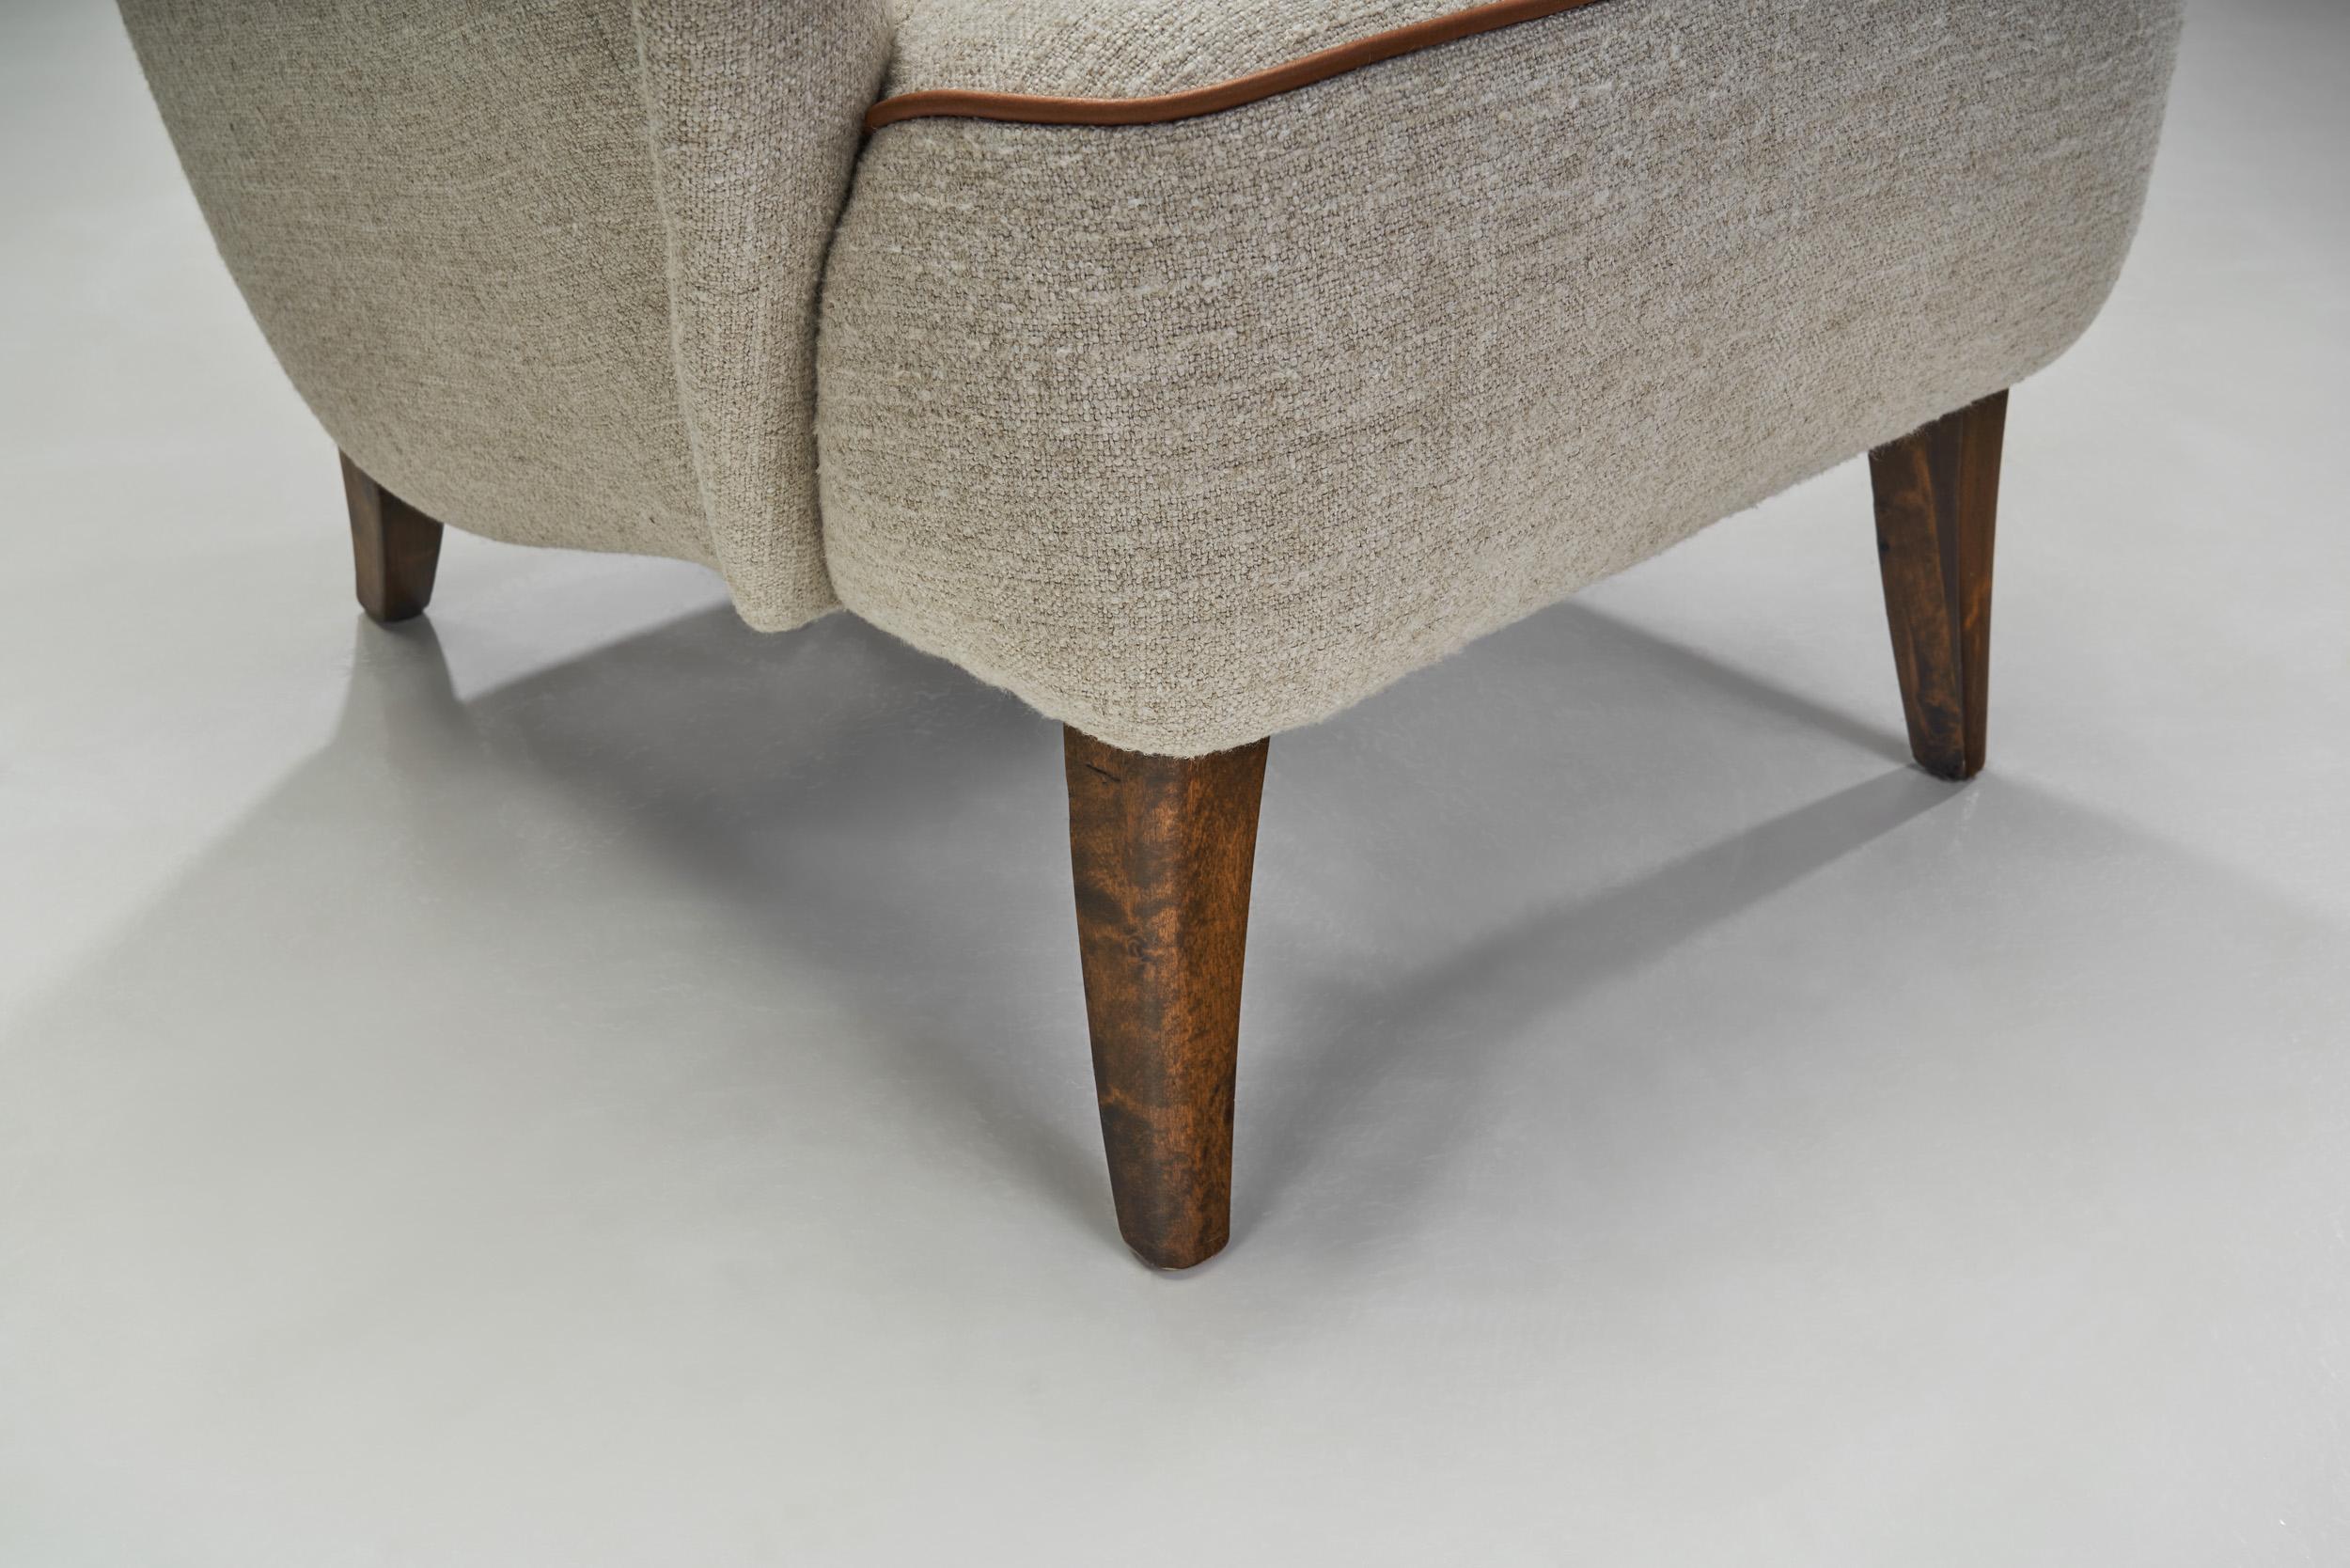 Danish Cabinetmaker Wing-Back Chair with Stained Beech Legs, Denmark 1940s For Sale 7